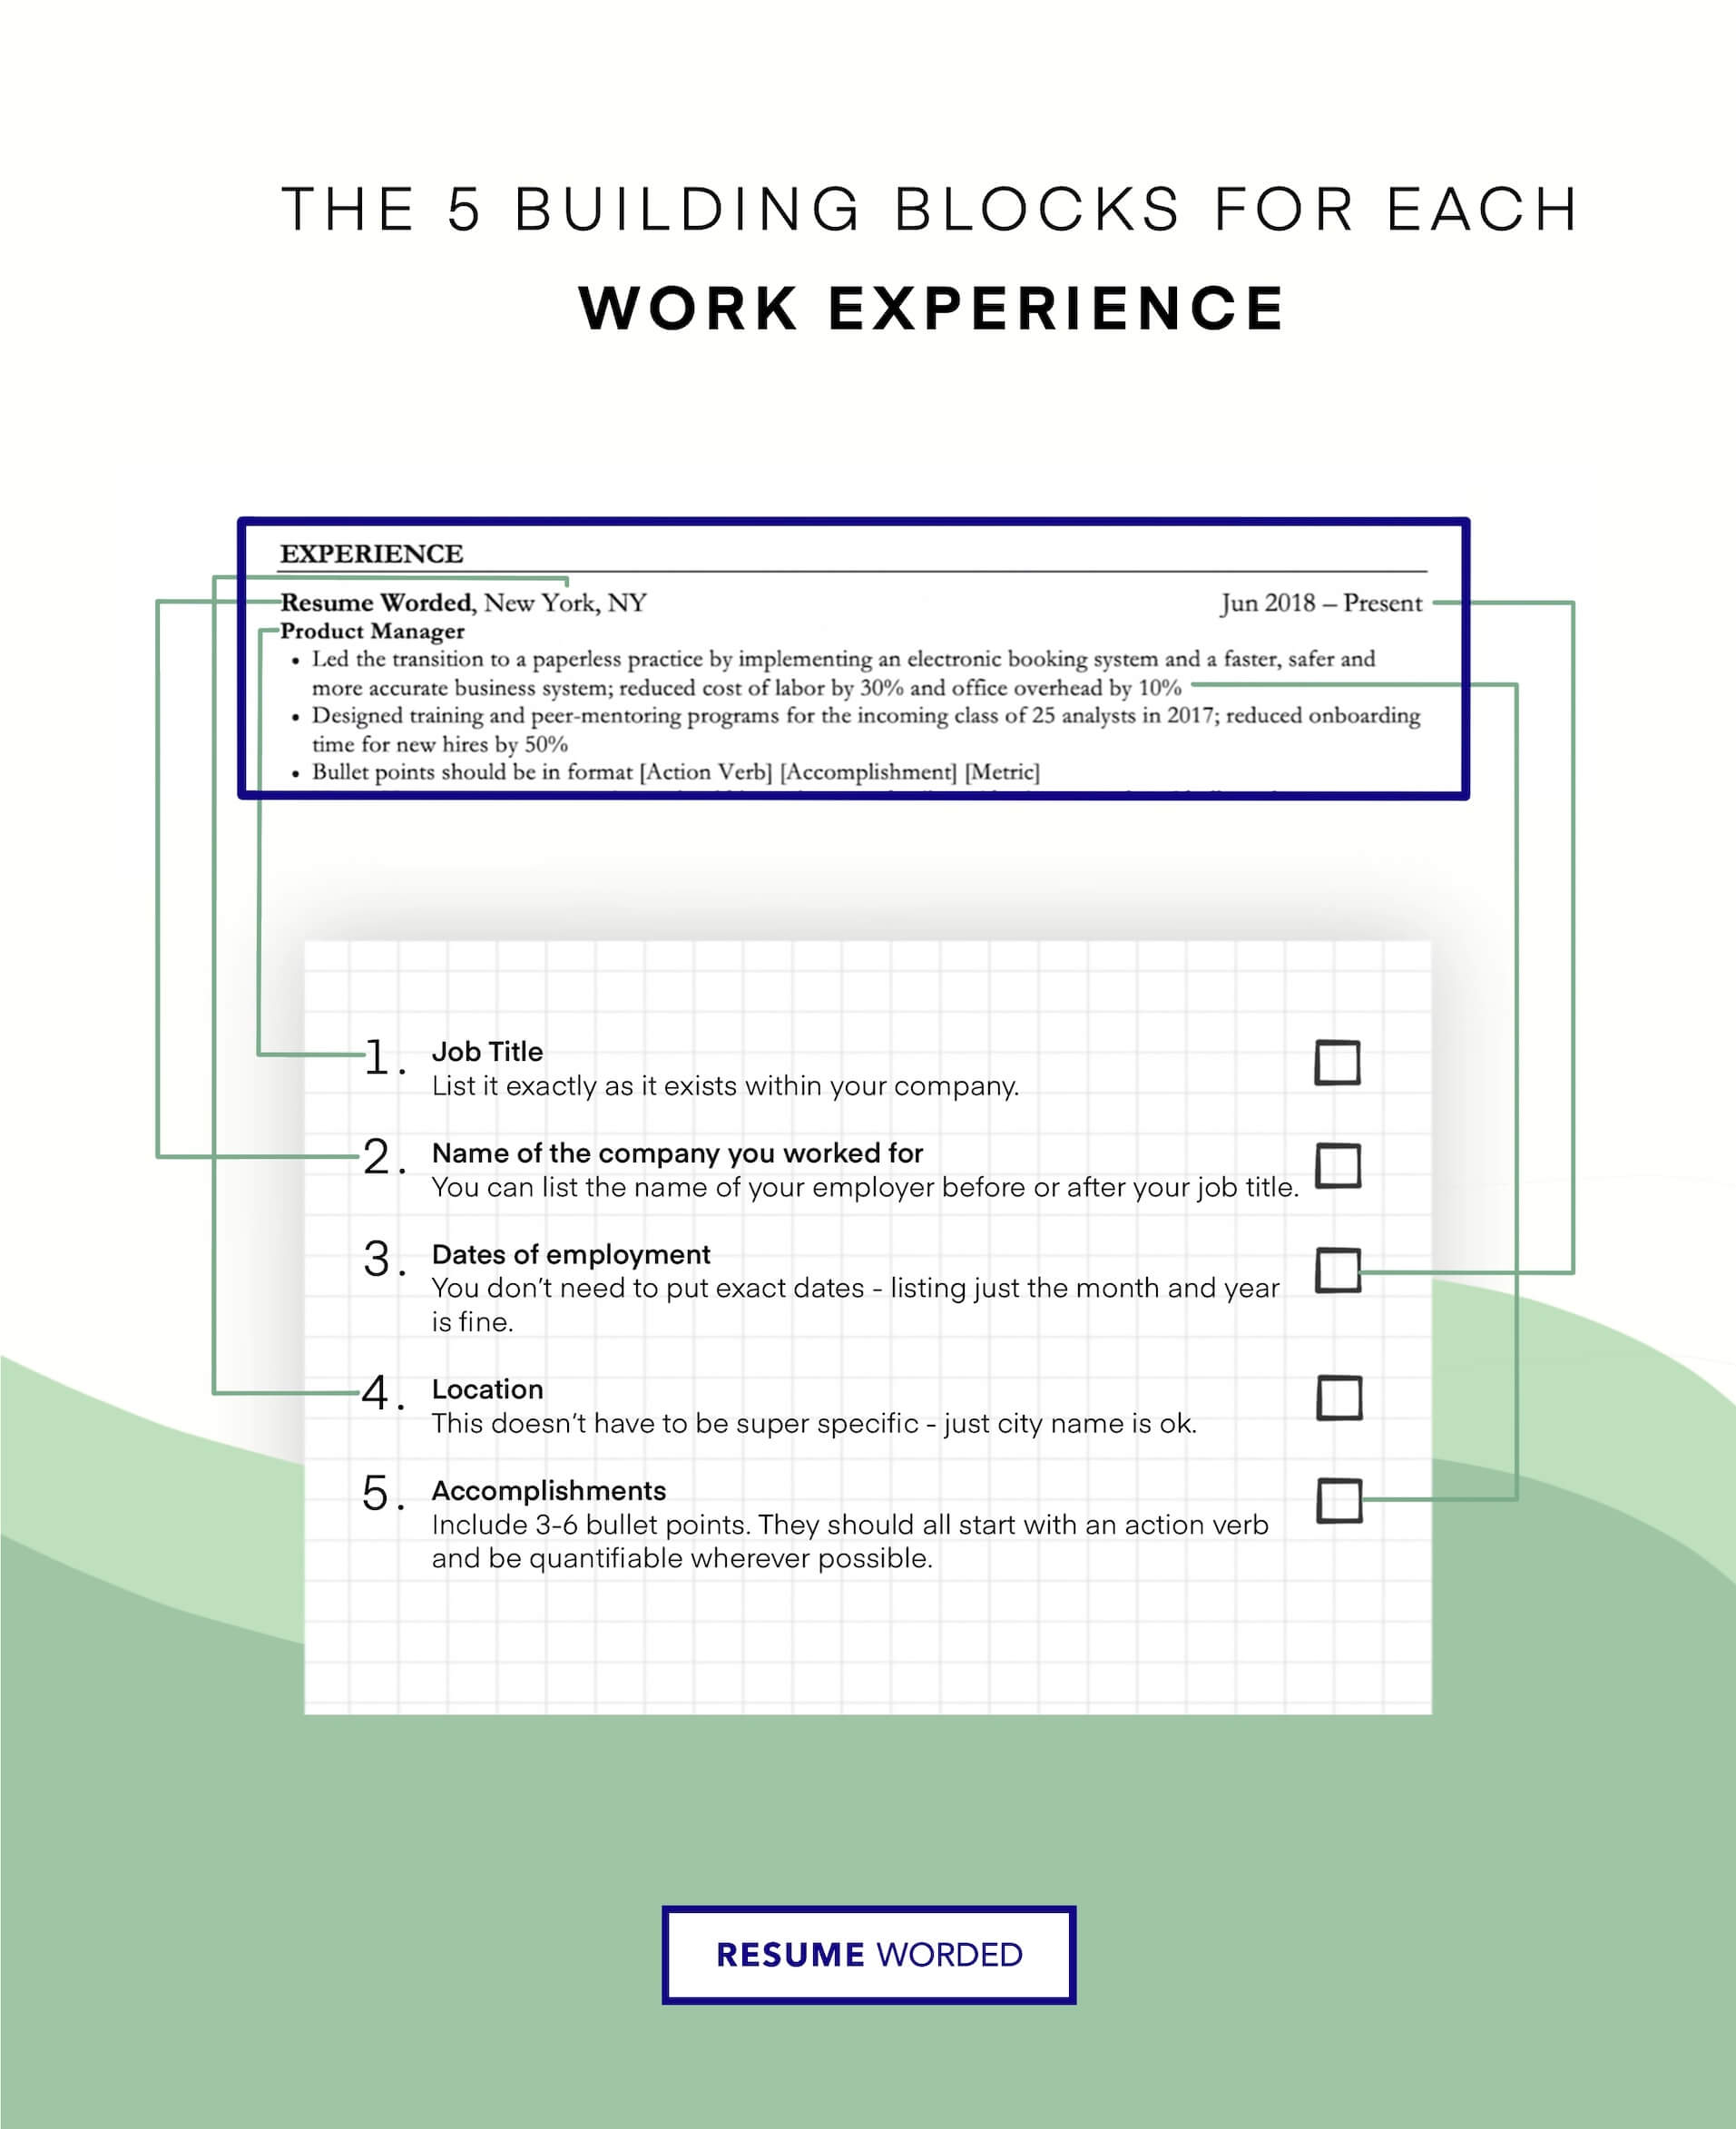 The five key components of a work experience section